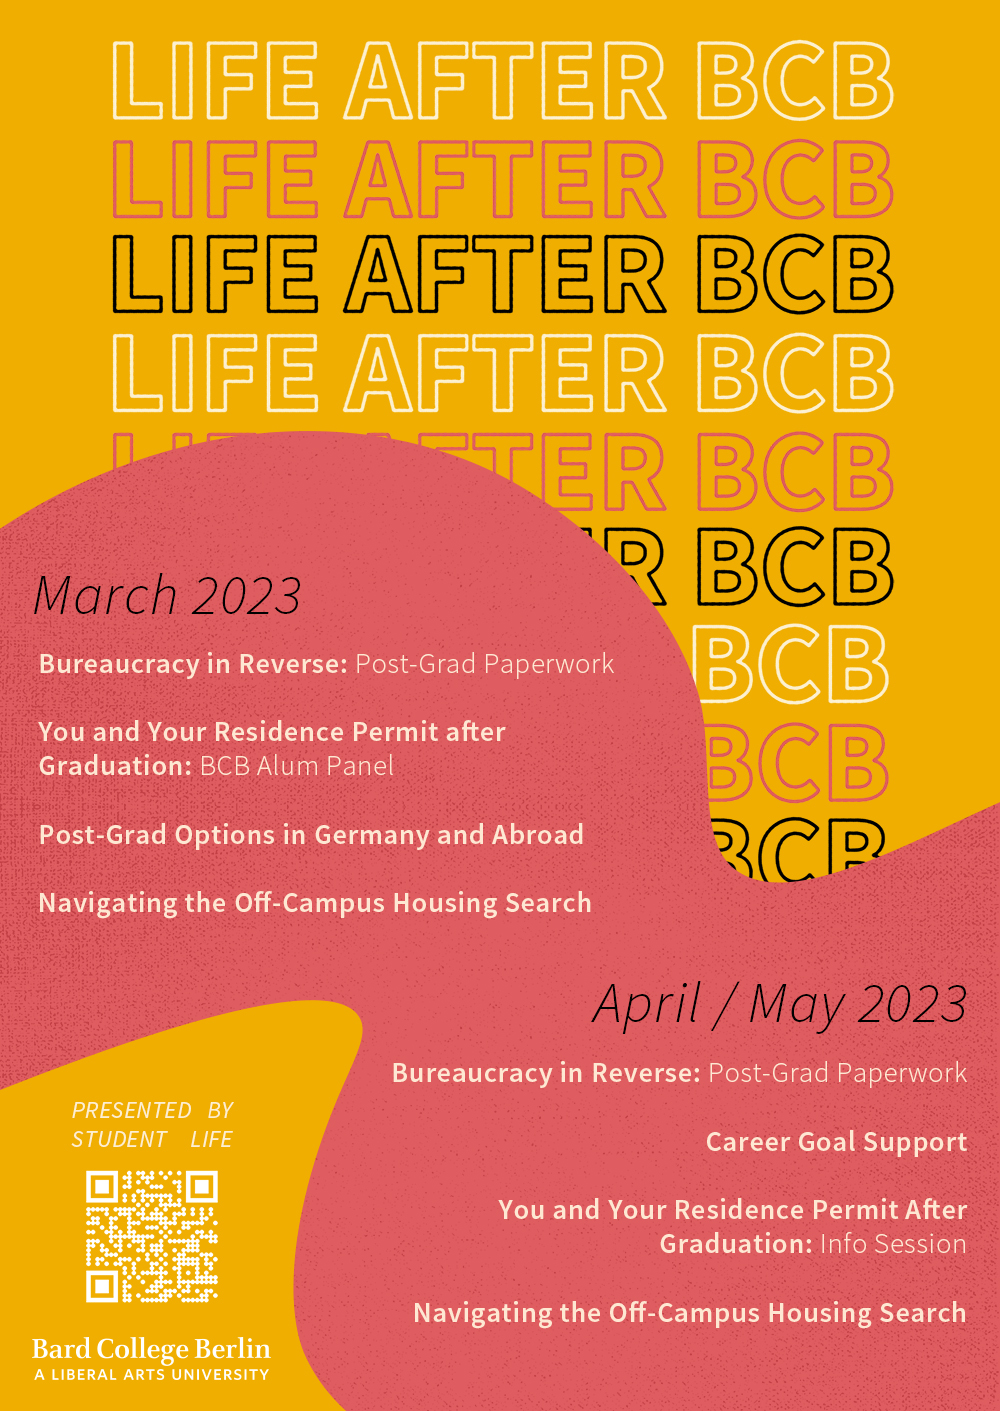 Preparing for Life After BCB